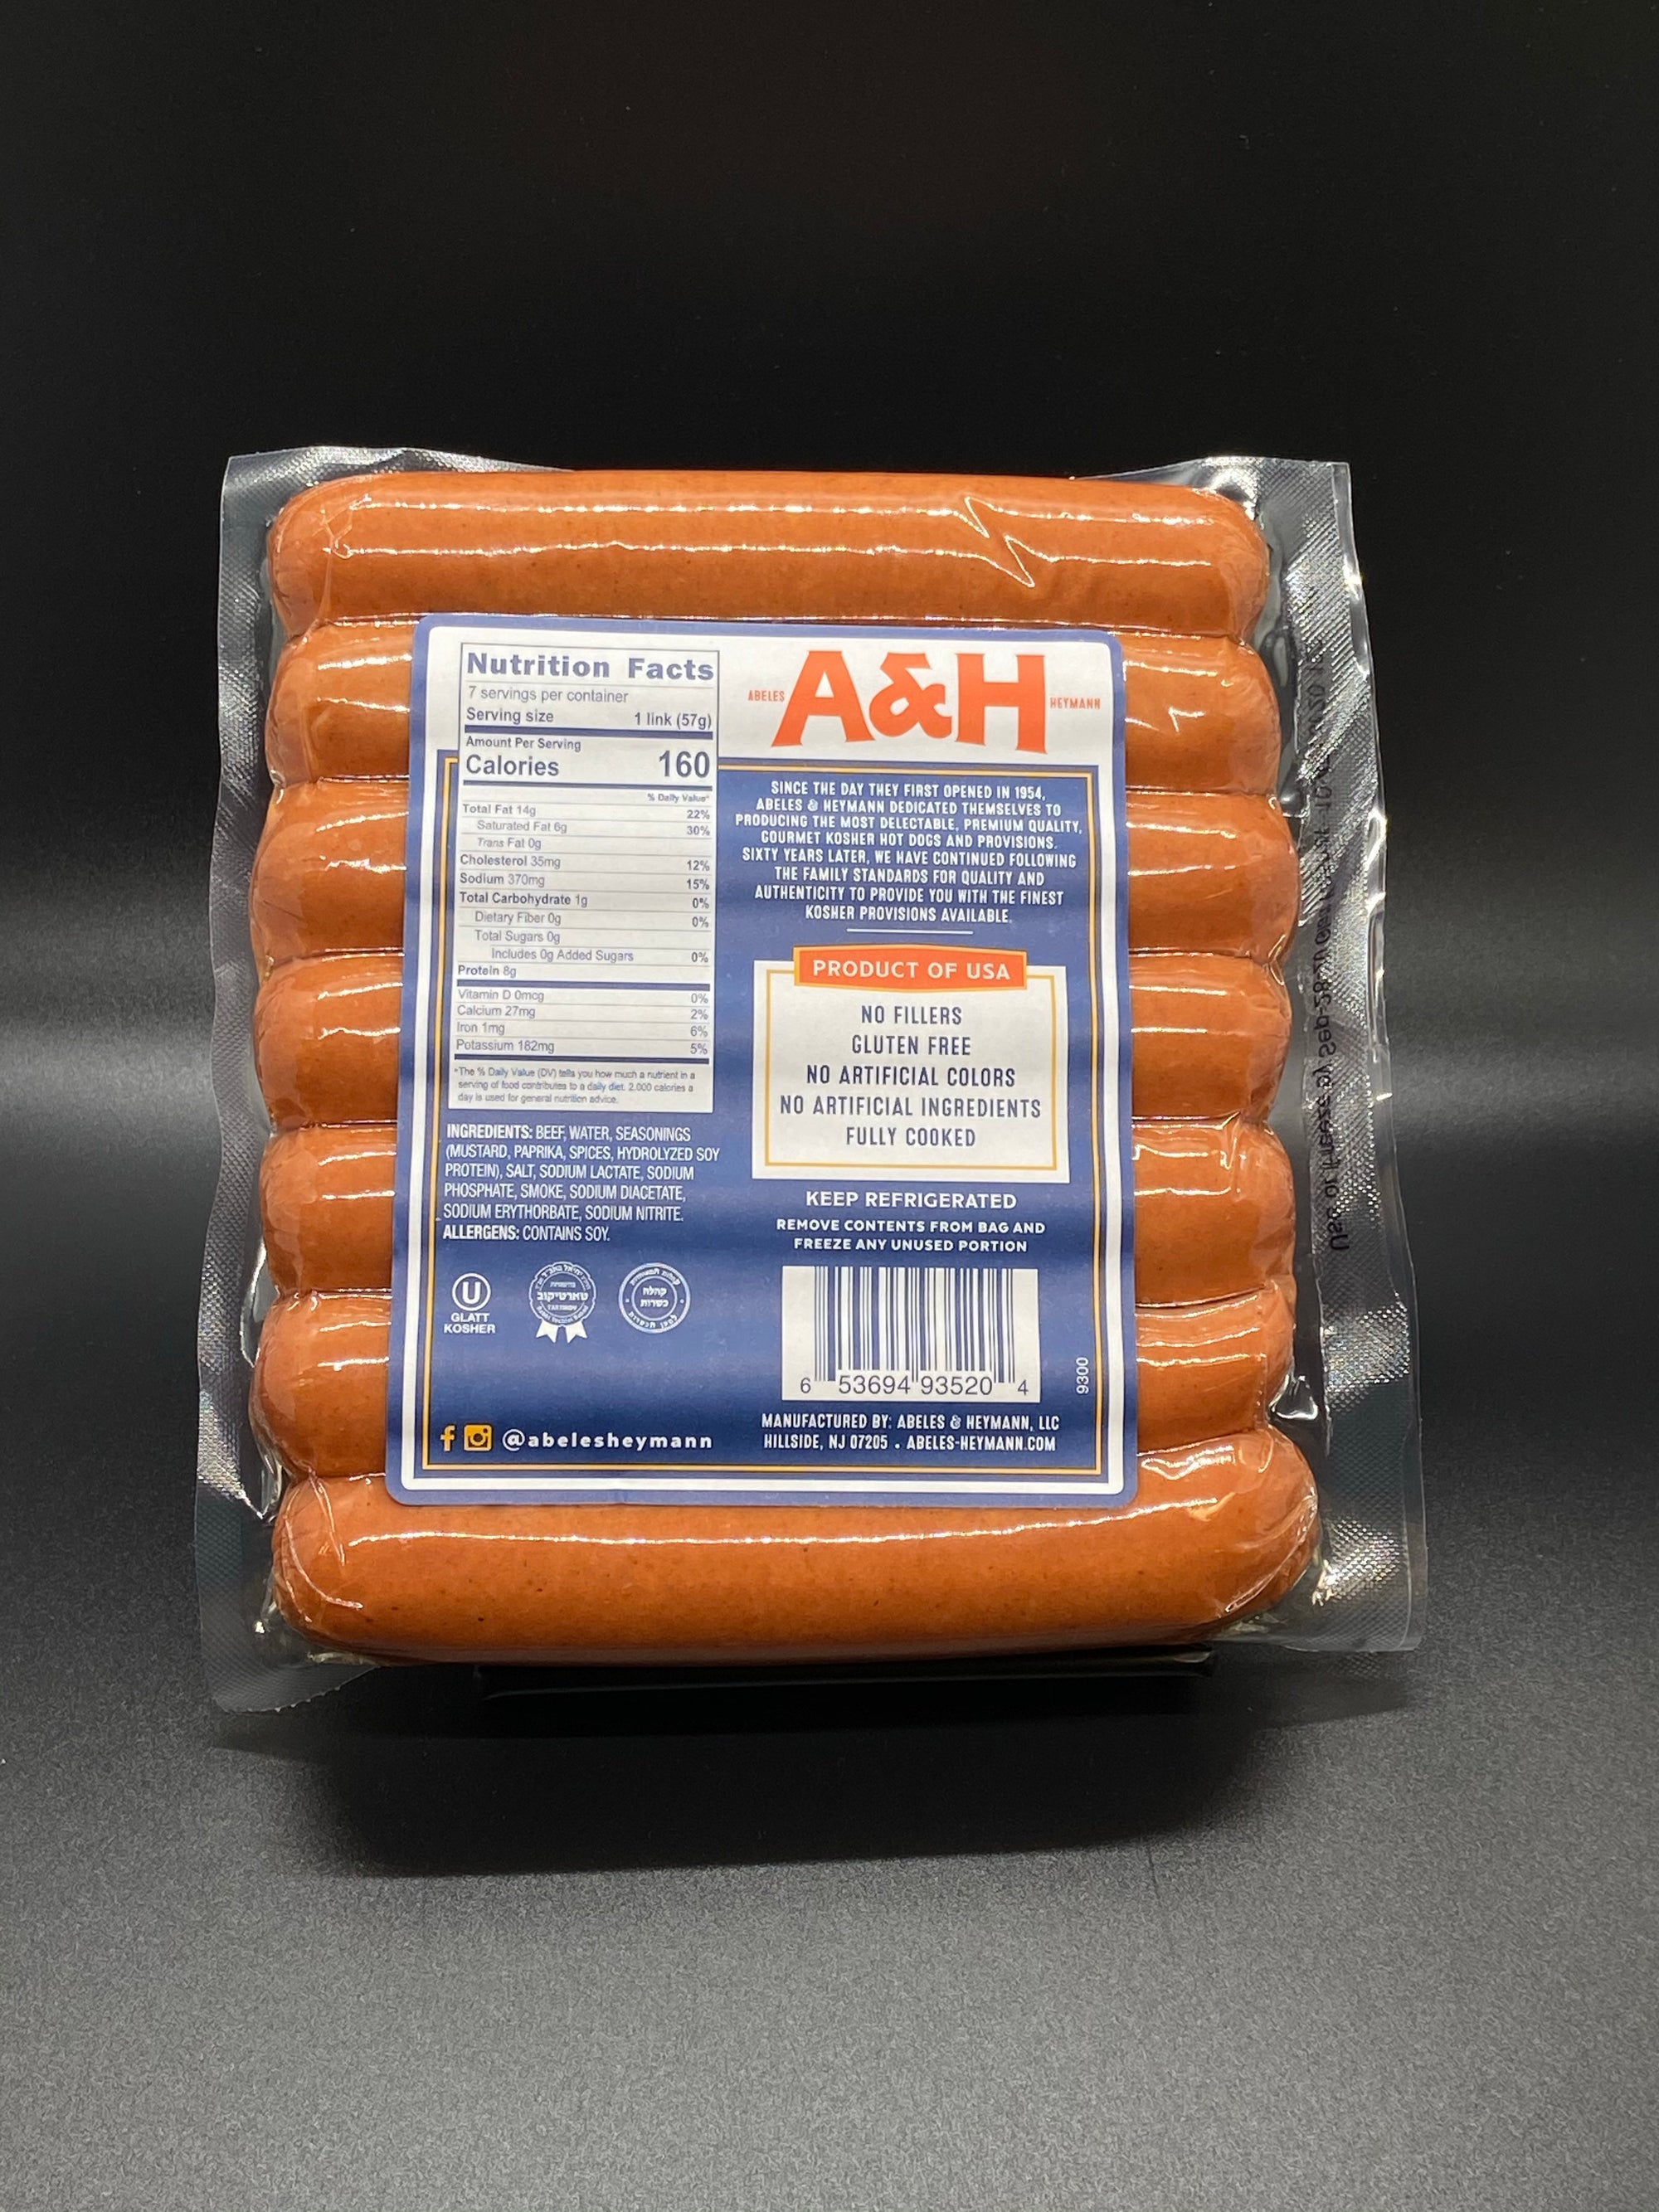 A &amp; H All Beef Kosher Hot Dogs  14 oz.